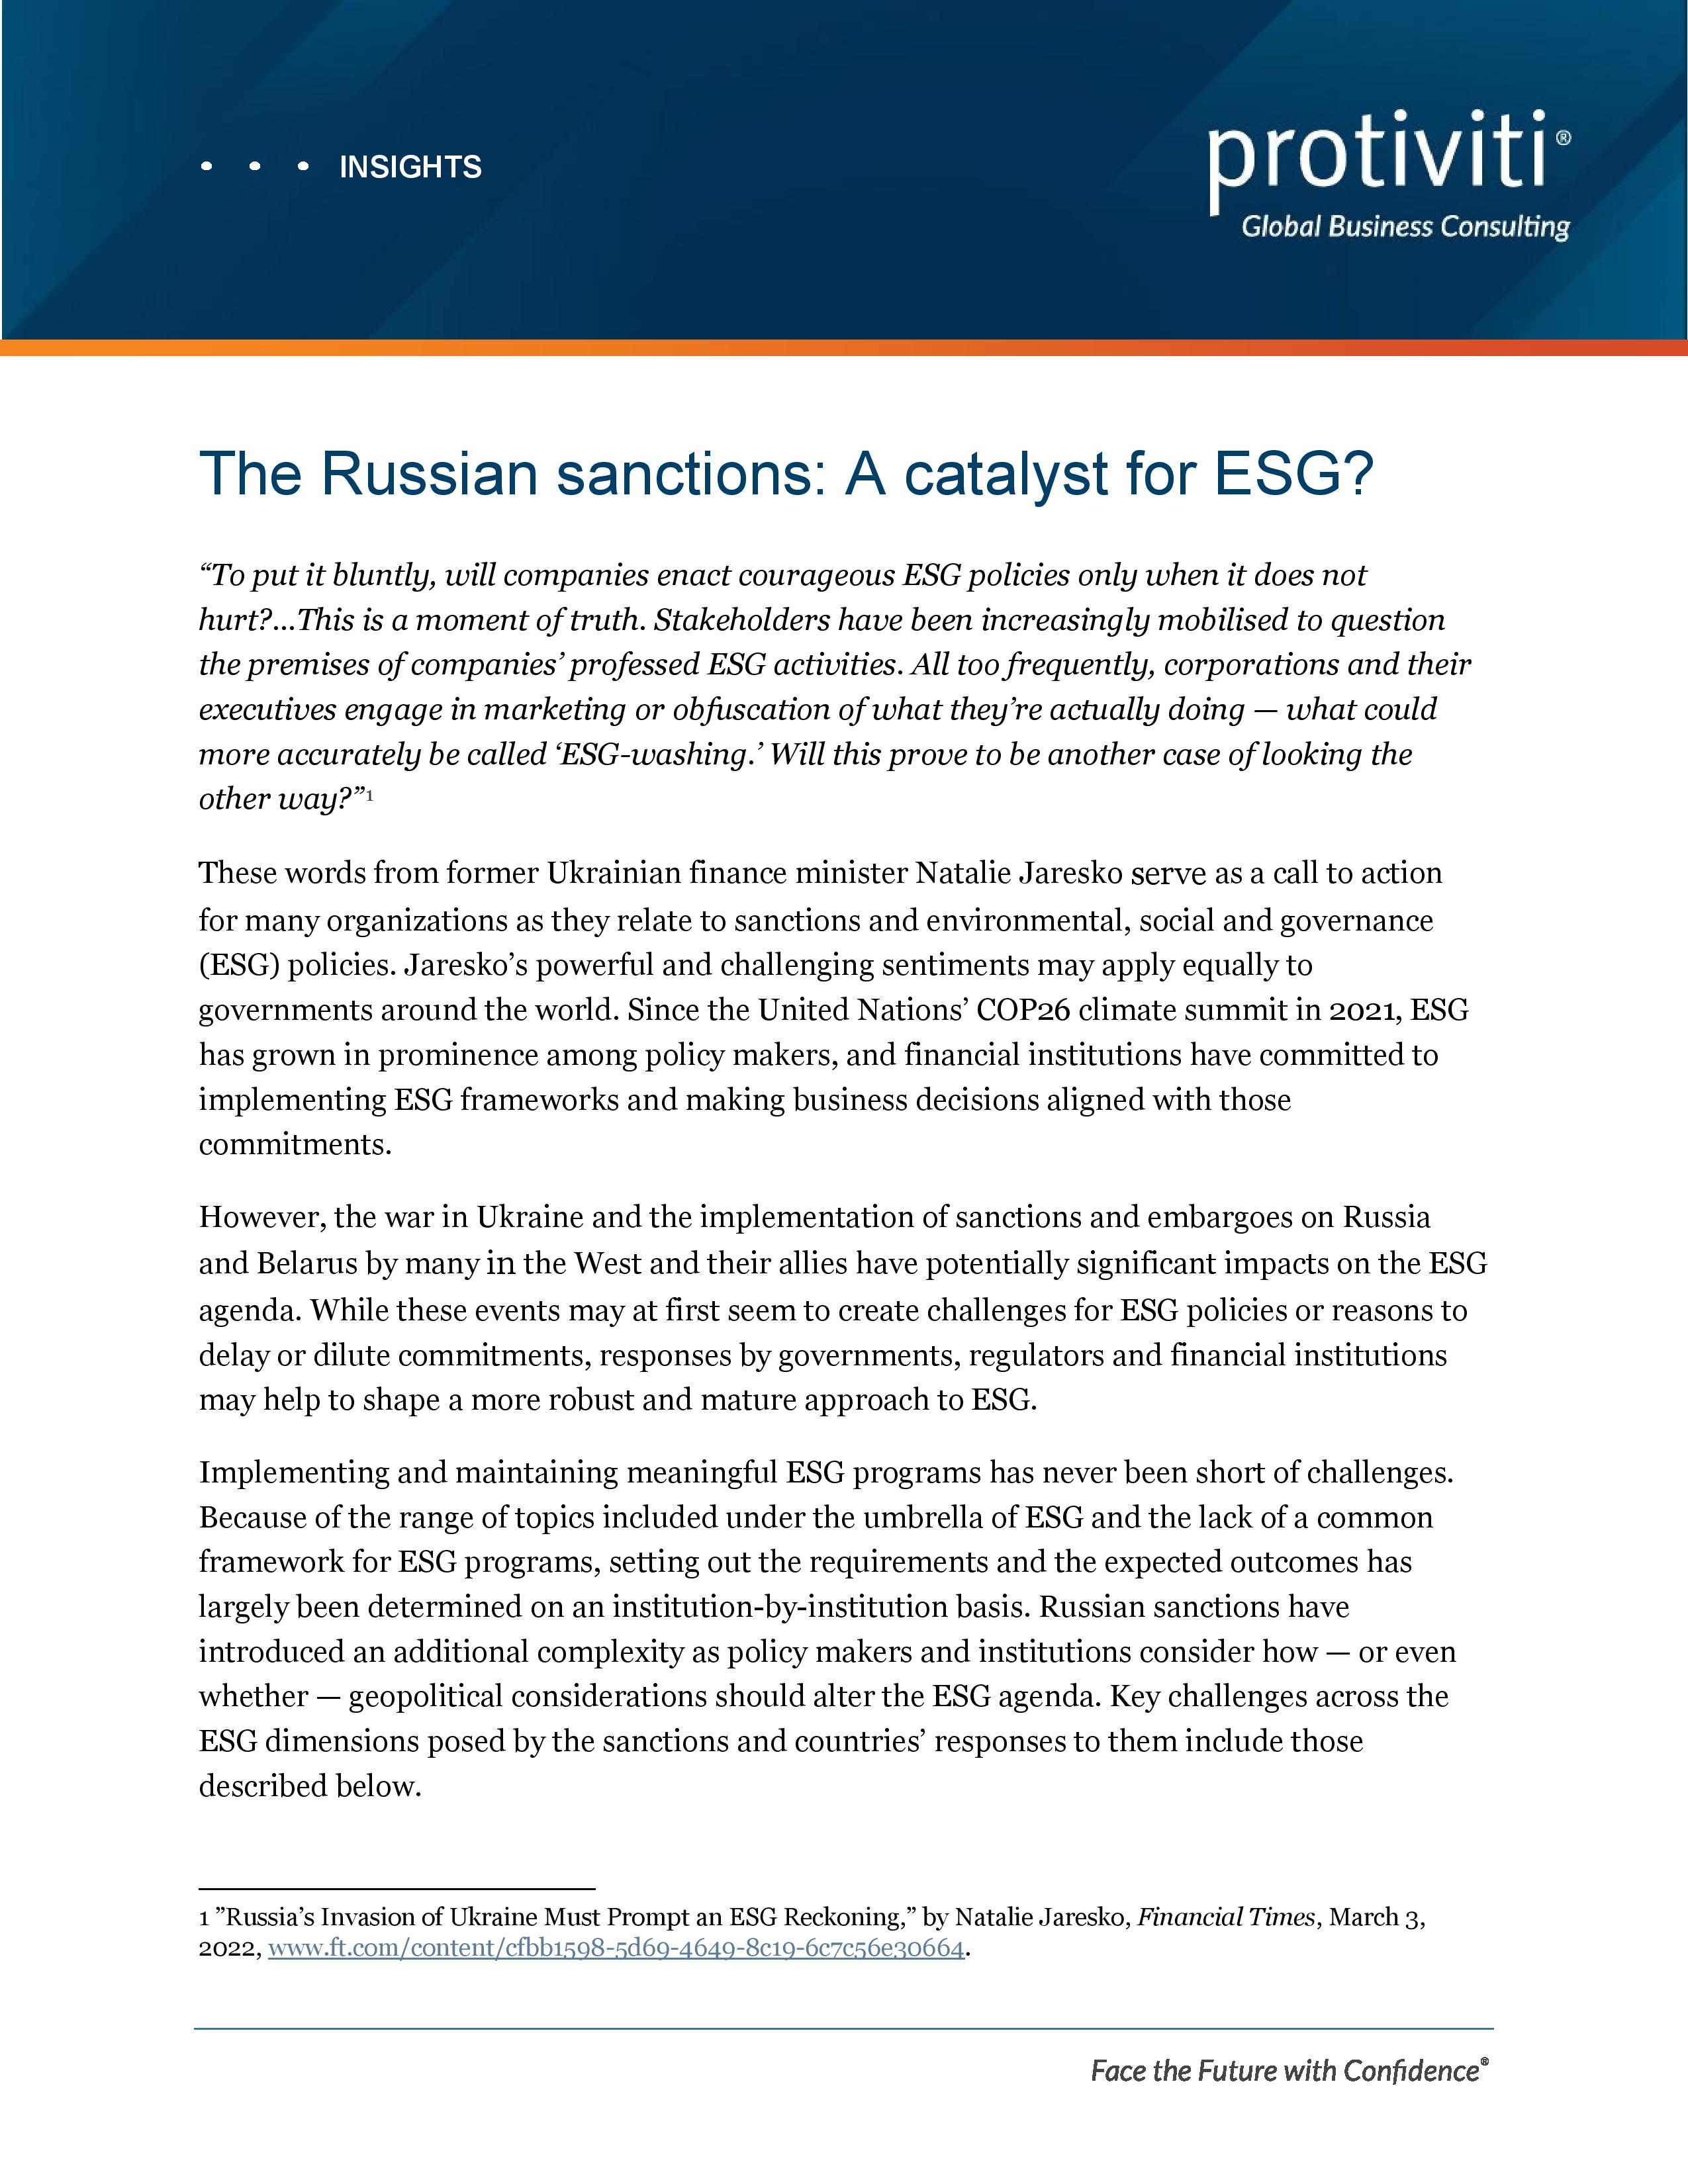 Screenshot of the first page of whitepaper-russian-sanctions-catalyst-for-esg-protiviti